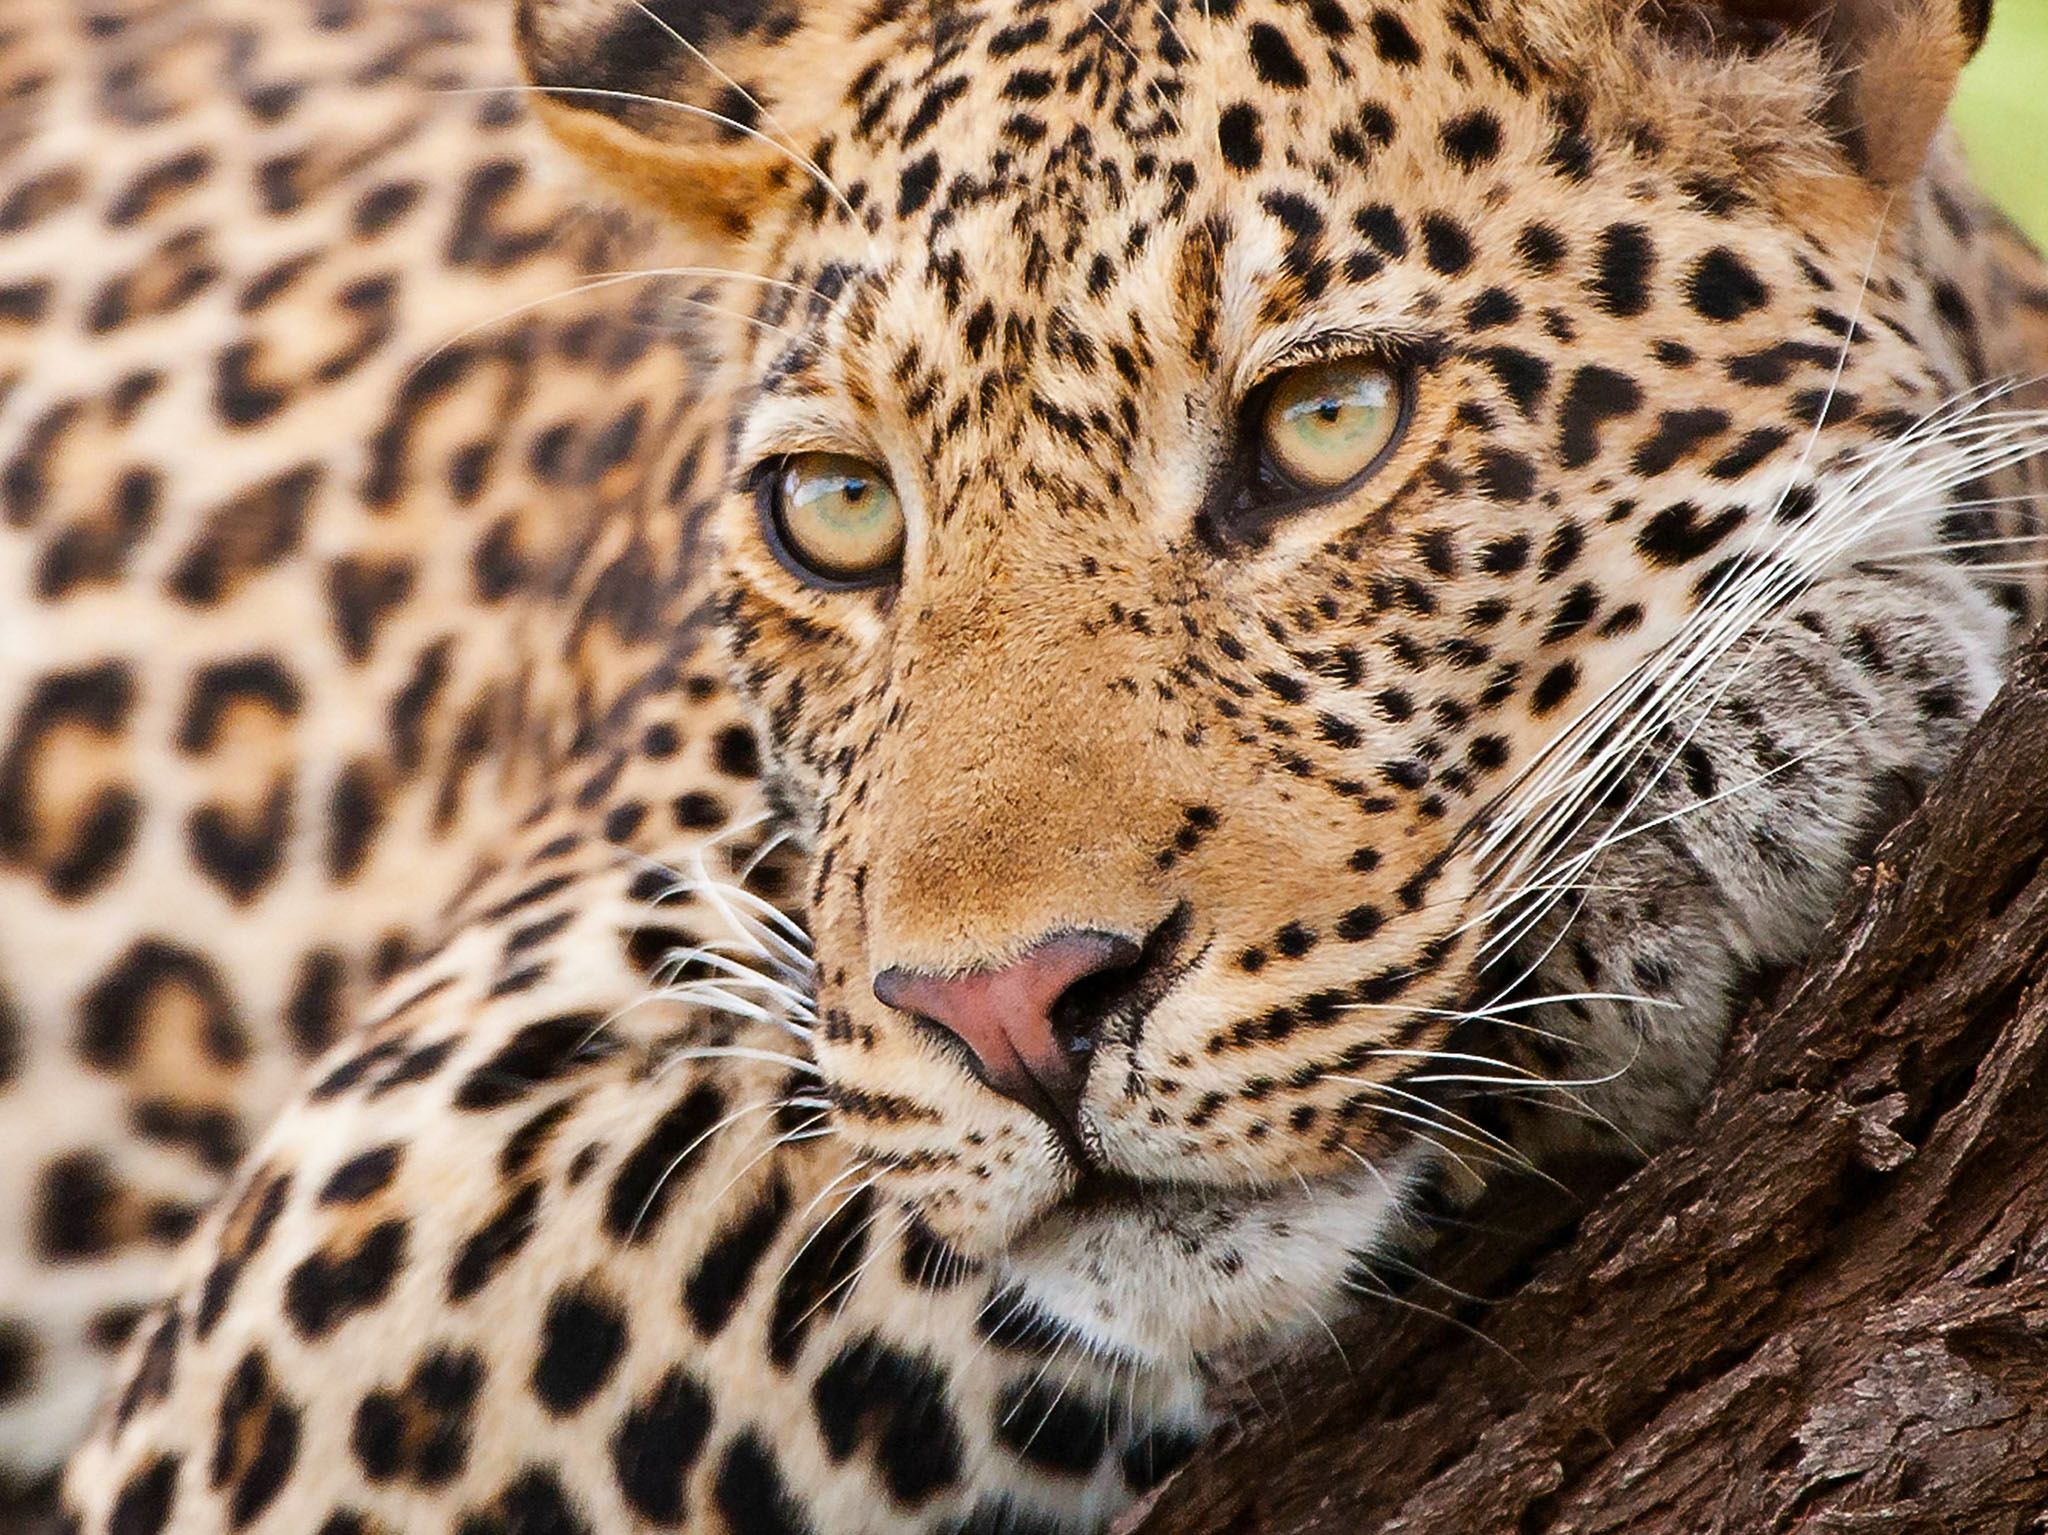 Mpumalanga, South Africa: Resting leopard at Mala Mala Game Reserve. This image is from Africa's... [Photo of the day - July 2017]